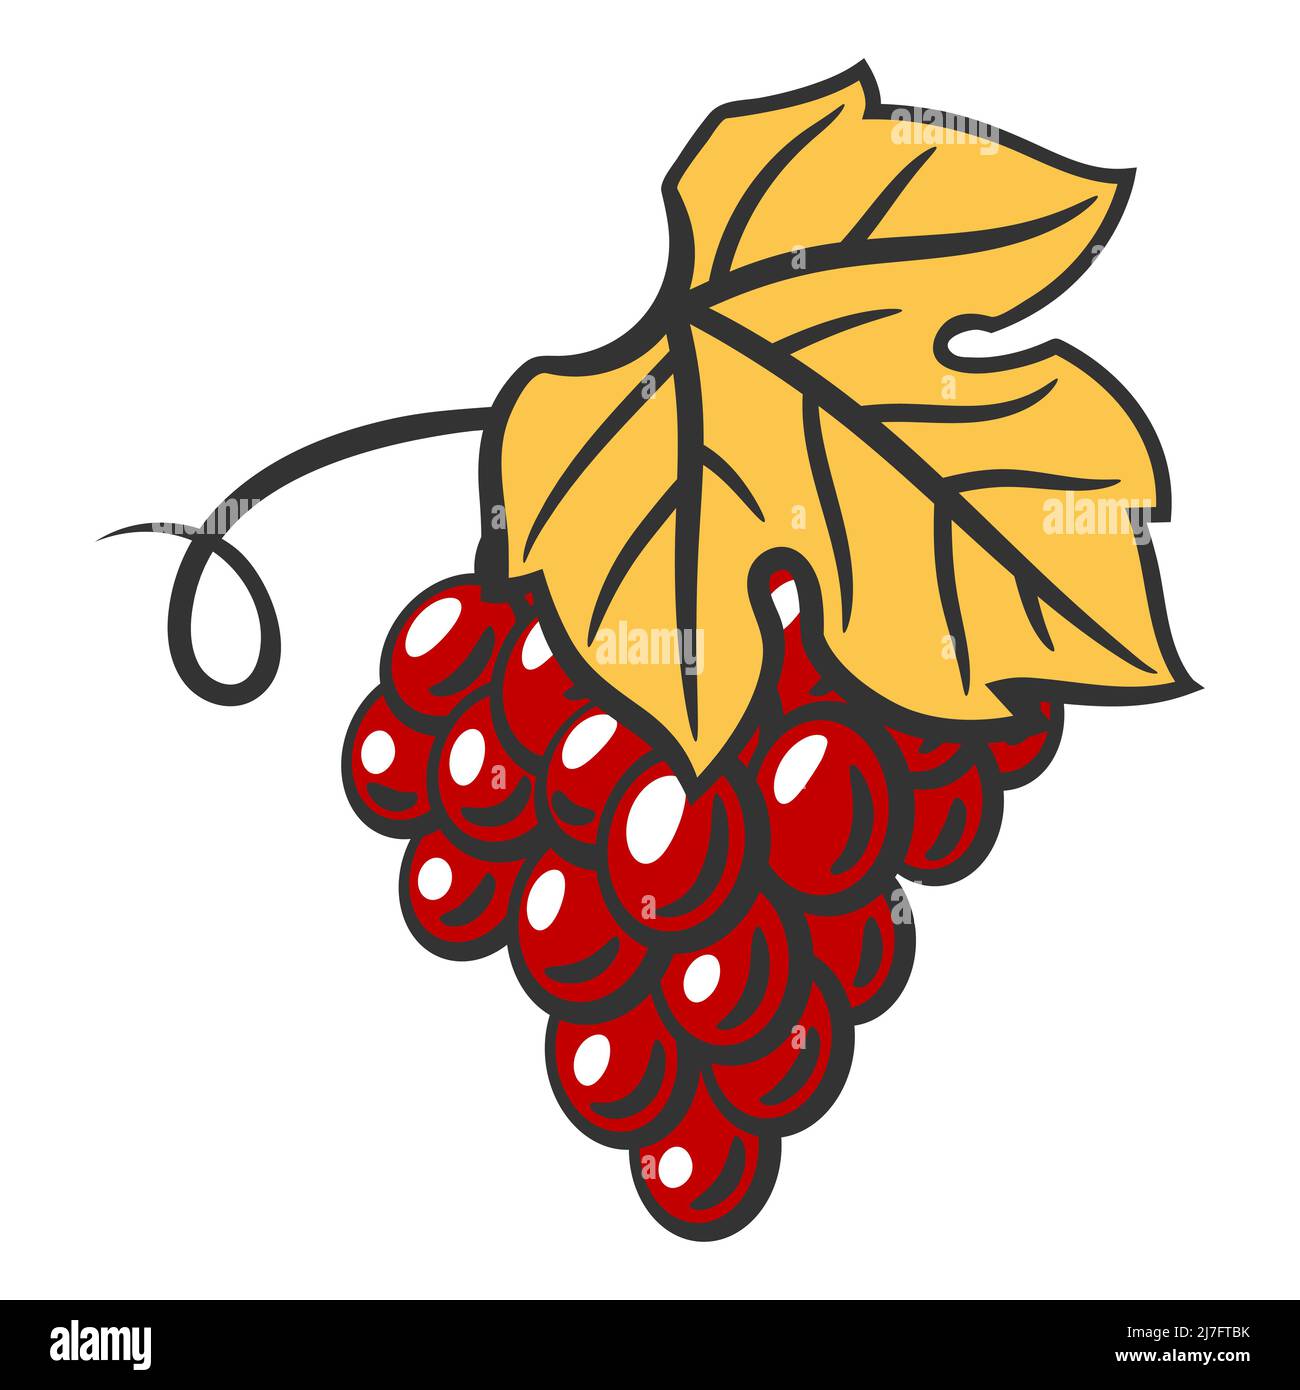 Illustration of bunch of red grapes. Winery image for restaurants and bars. Business and agricultural item. Stock Vector